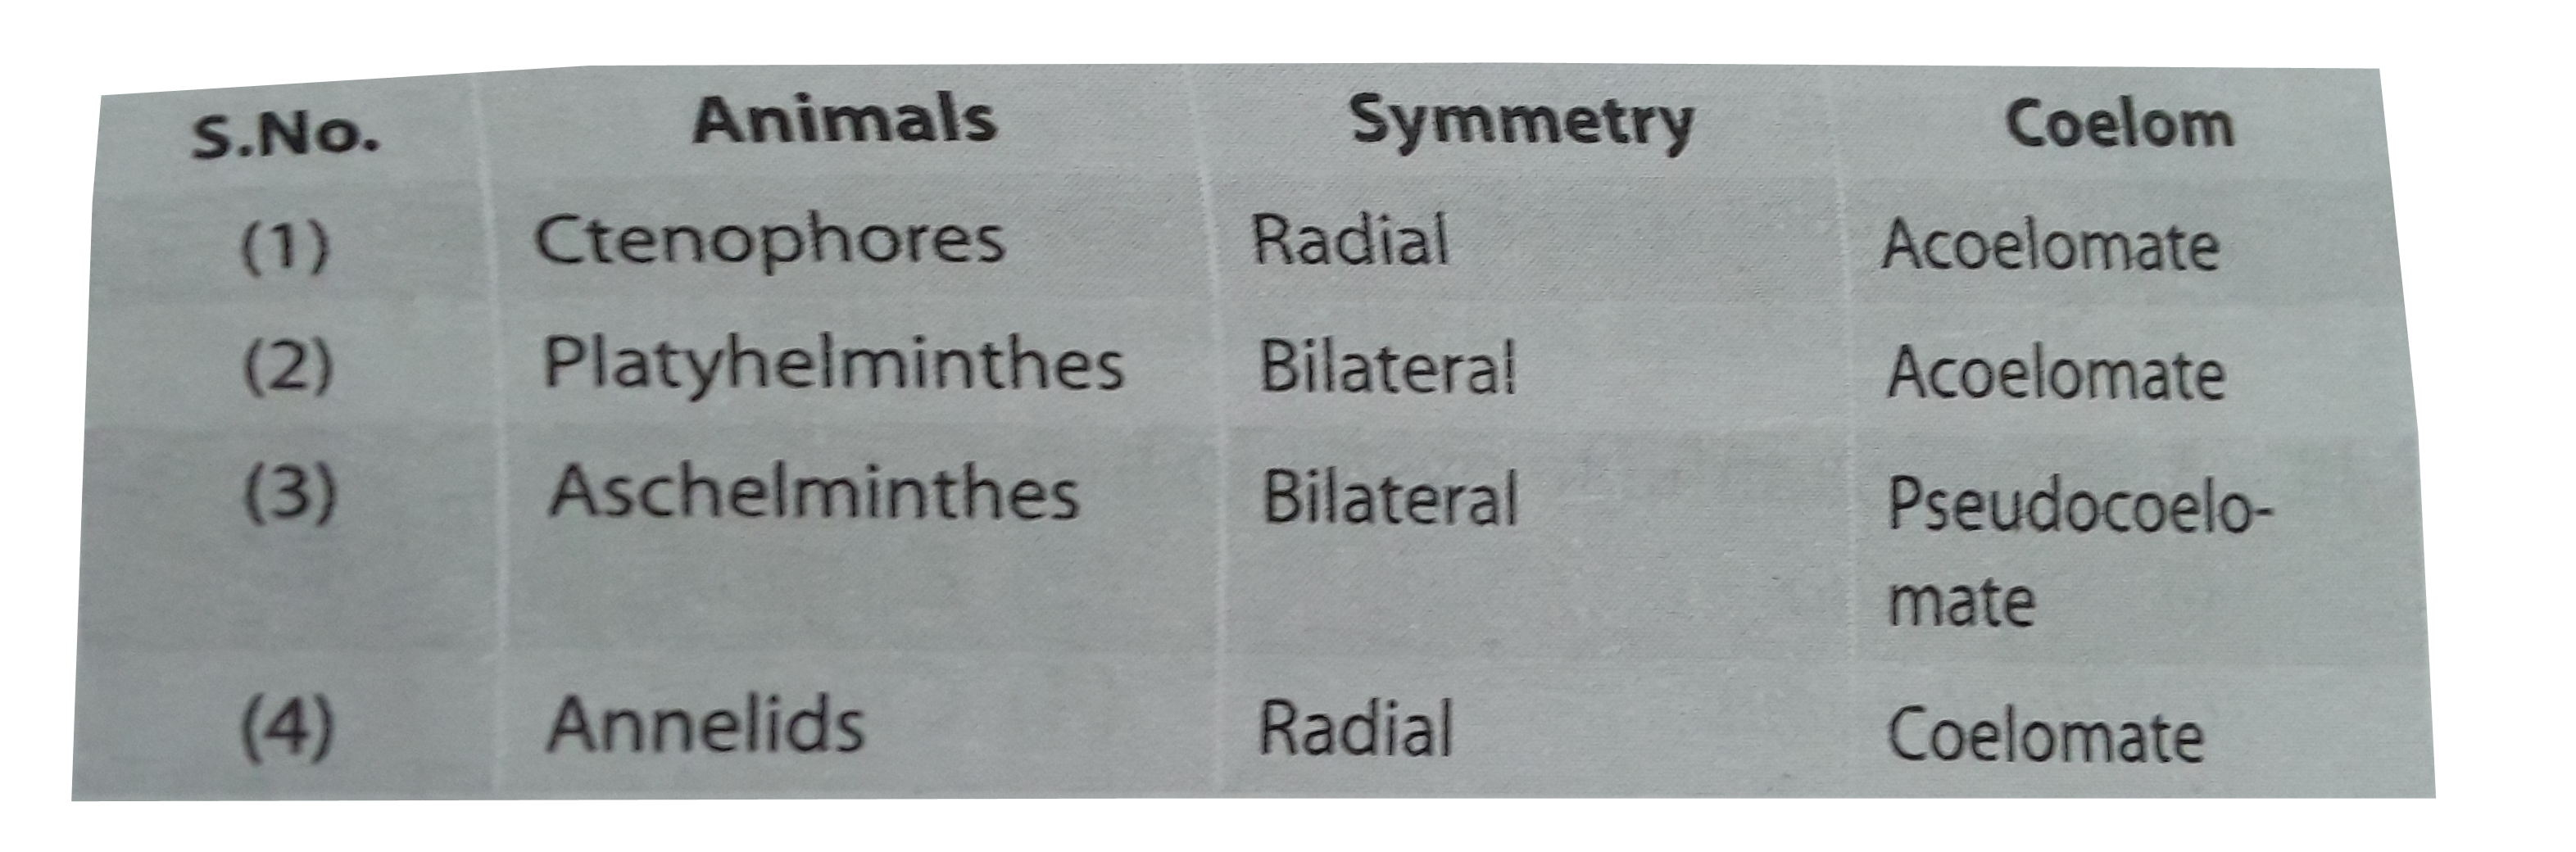 Select incorrect matching of animlas, their body symmetry , and coelom.